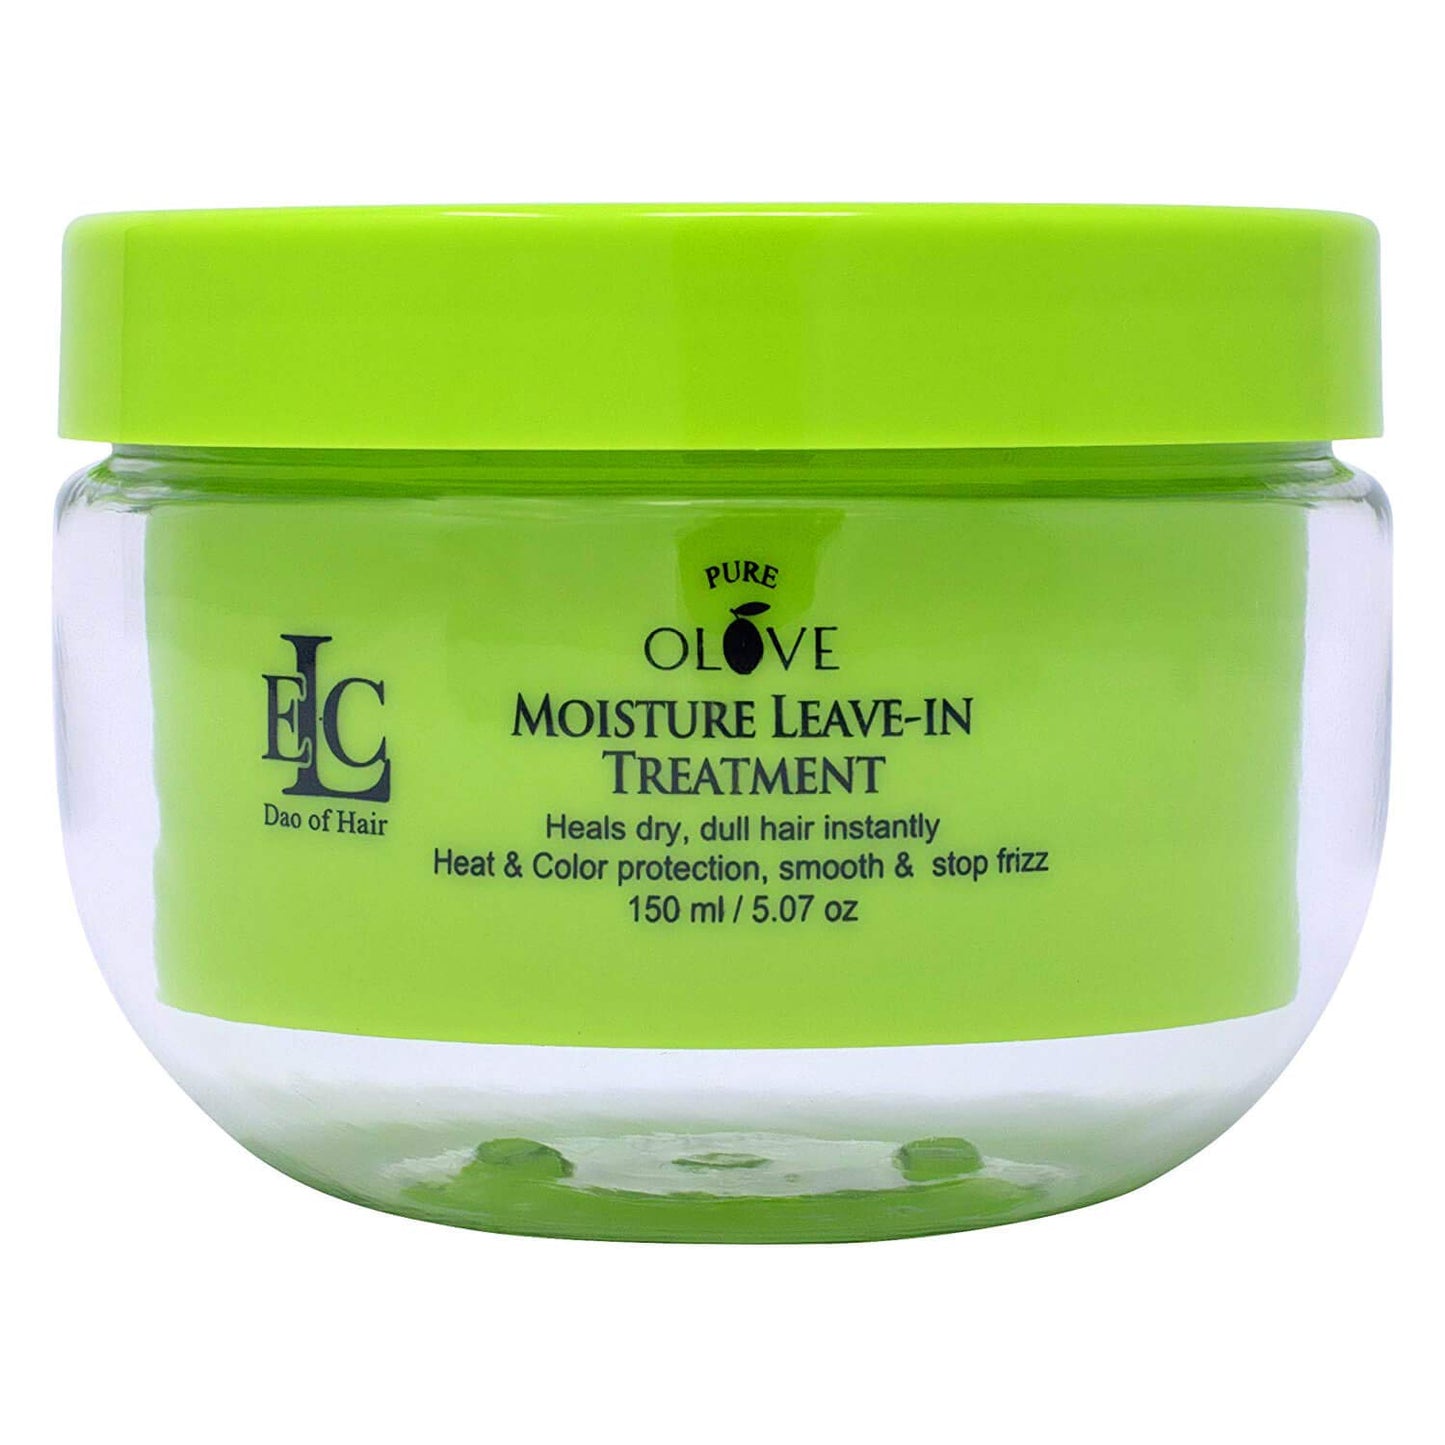 ELC Pure Olove 3 Moisture Leave In Treatment 5.07 oz. for all Hair Types